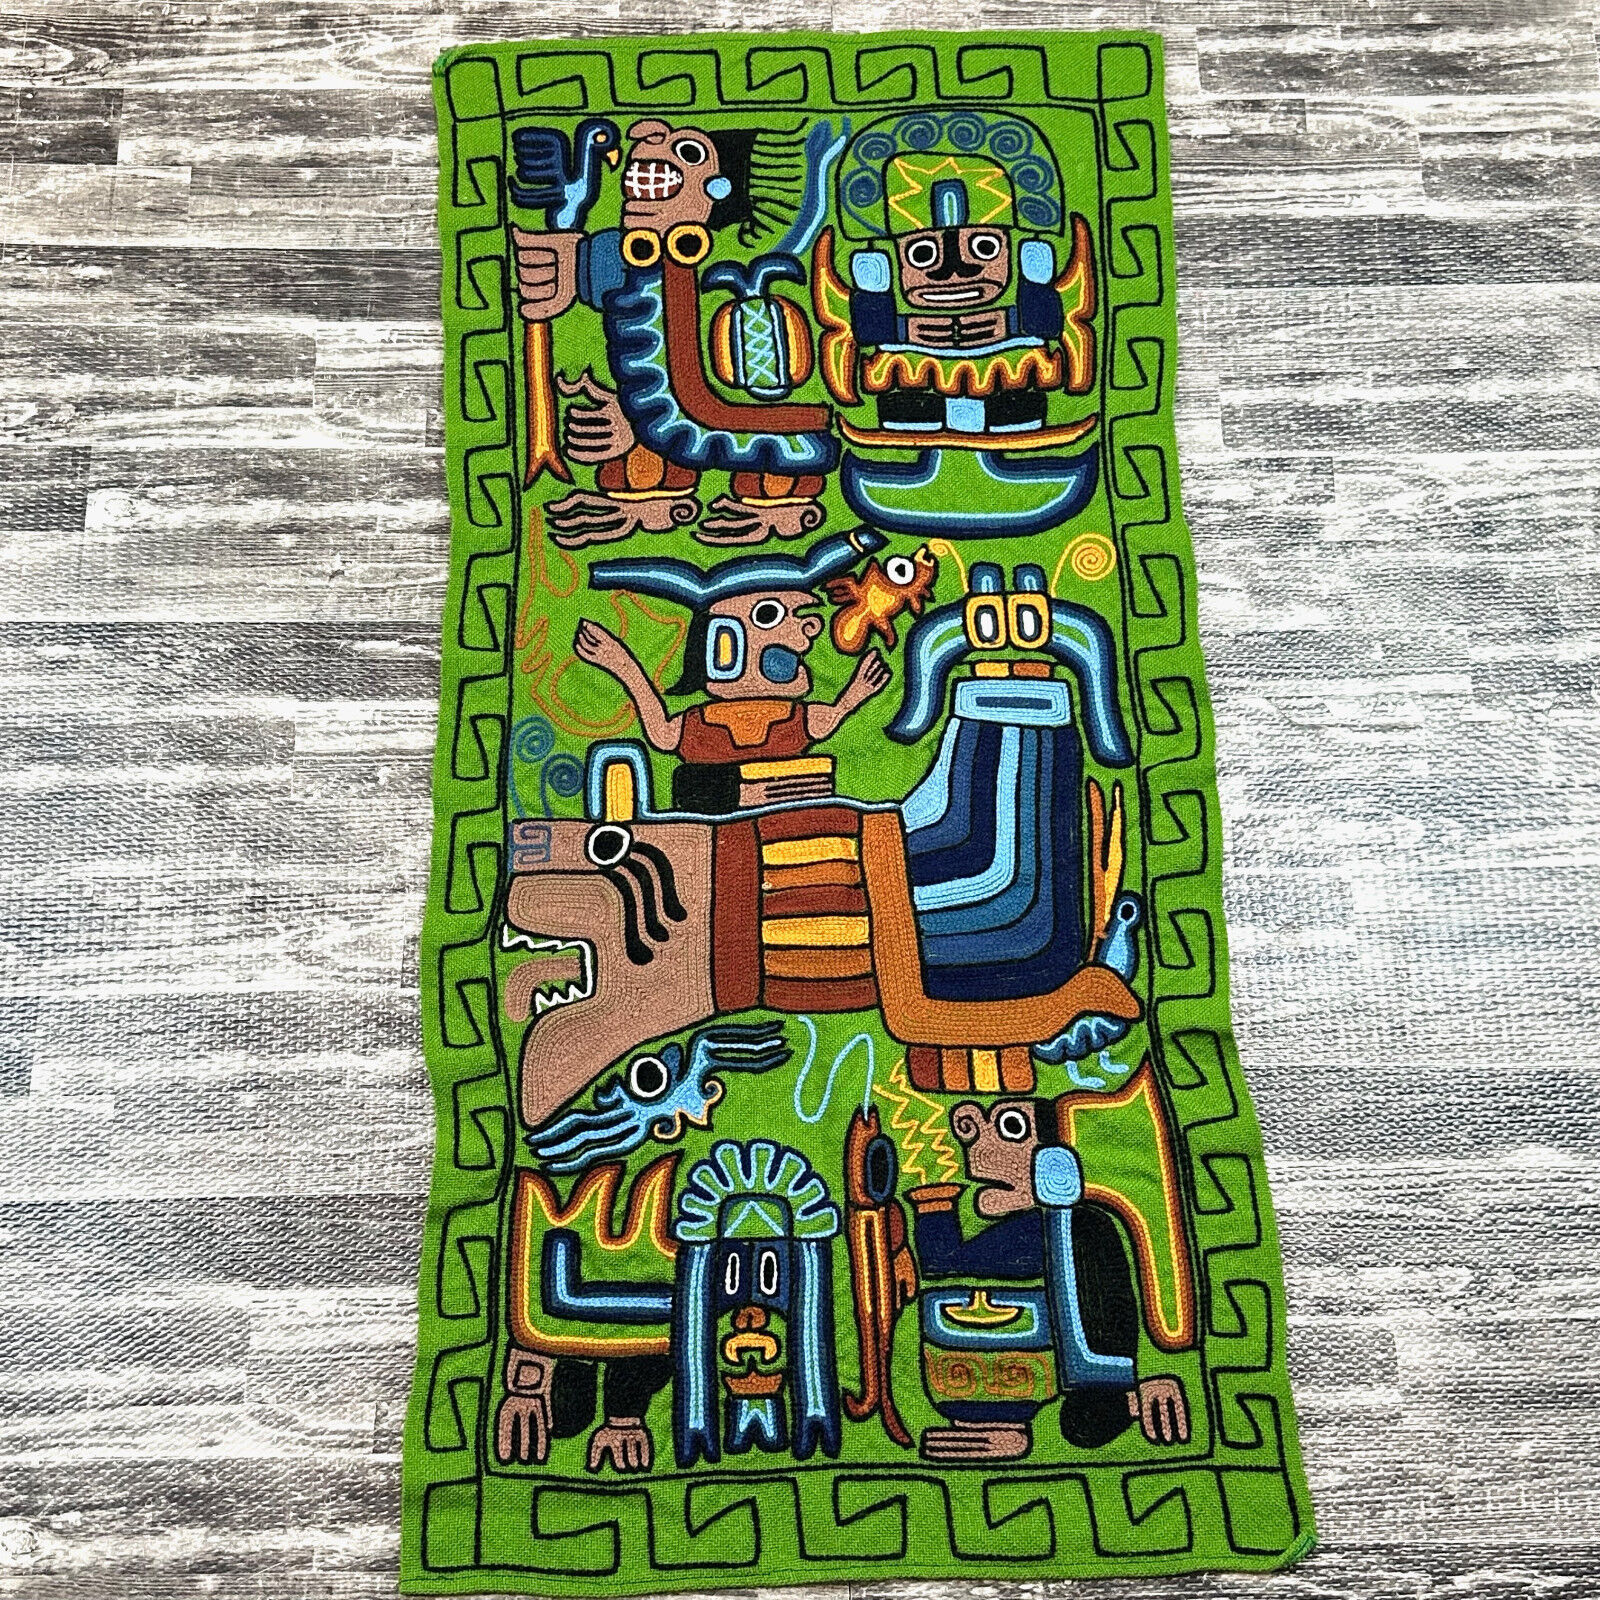 South American Folk Art Wall Hanging Embroidered Tapestry Tribal Vibrant Green